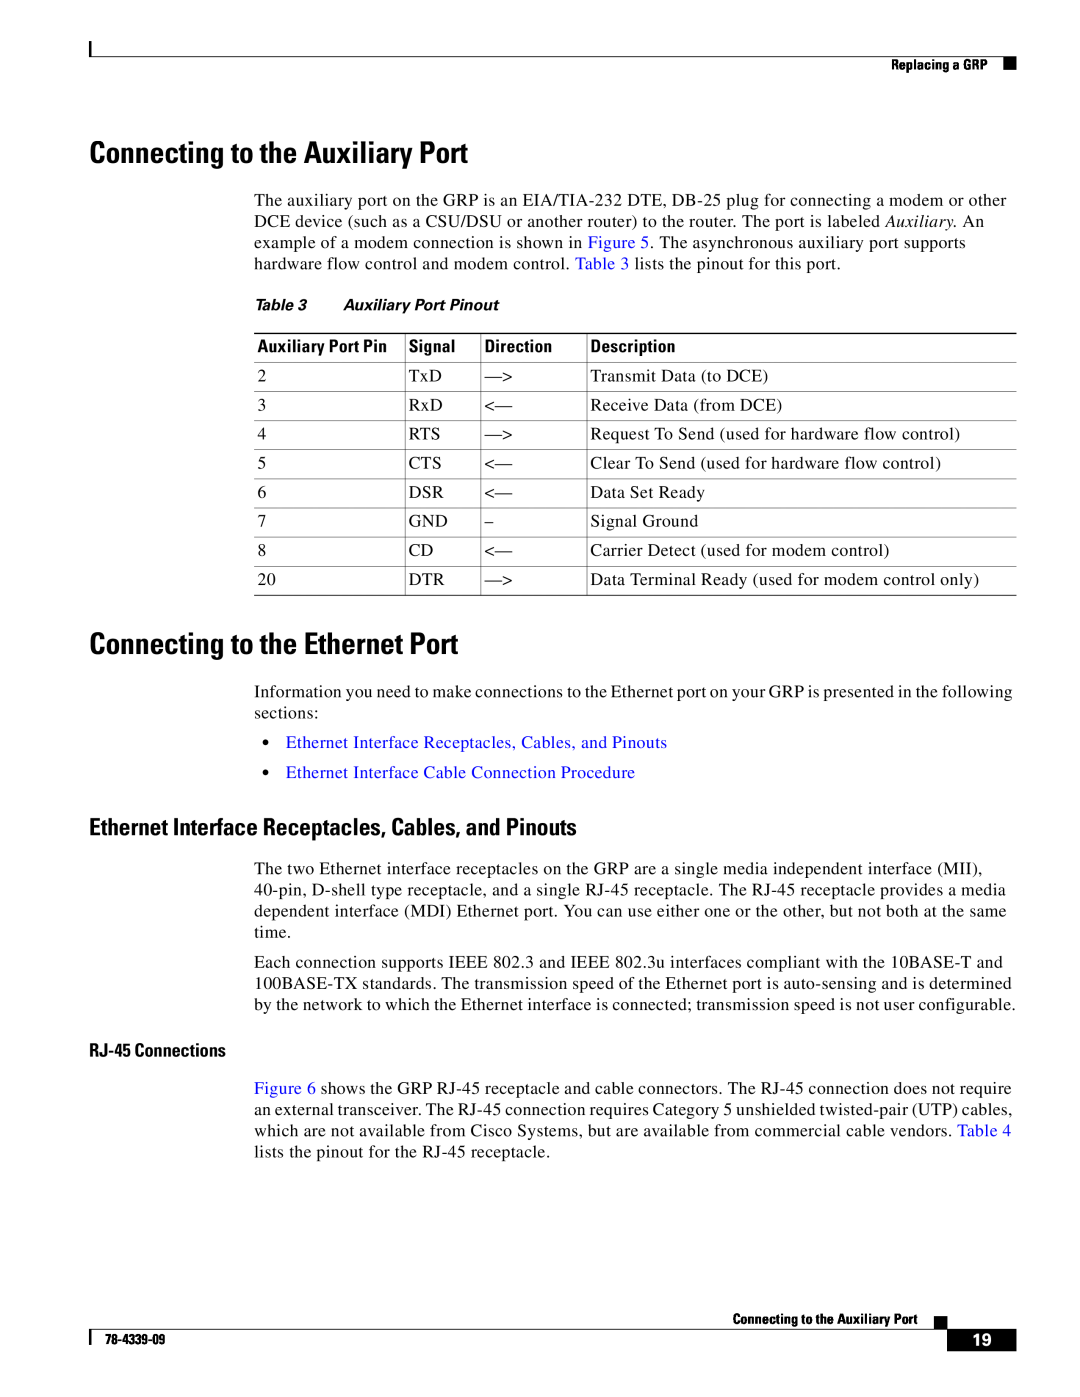 Cisco Systems GRP-B manual Connecting to the Auxiliary Port, Connecting to the Ethernet Port, RJ-45 Connections 